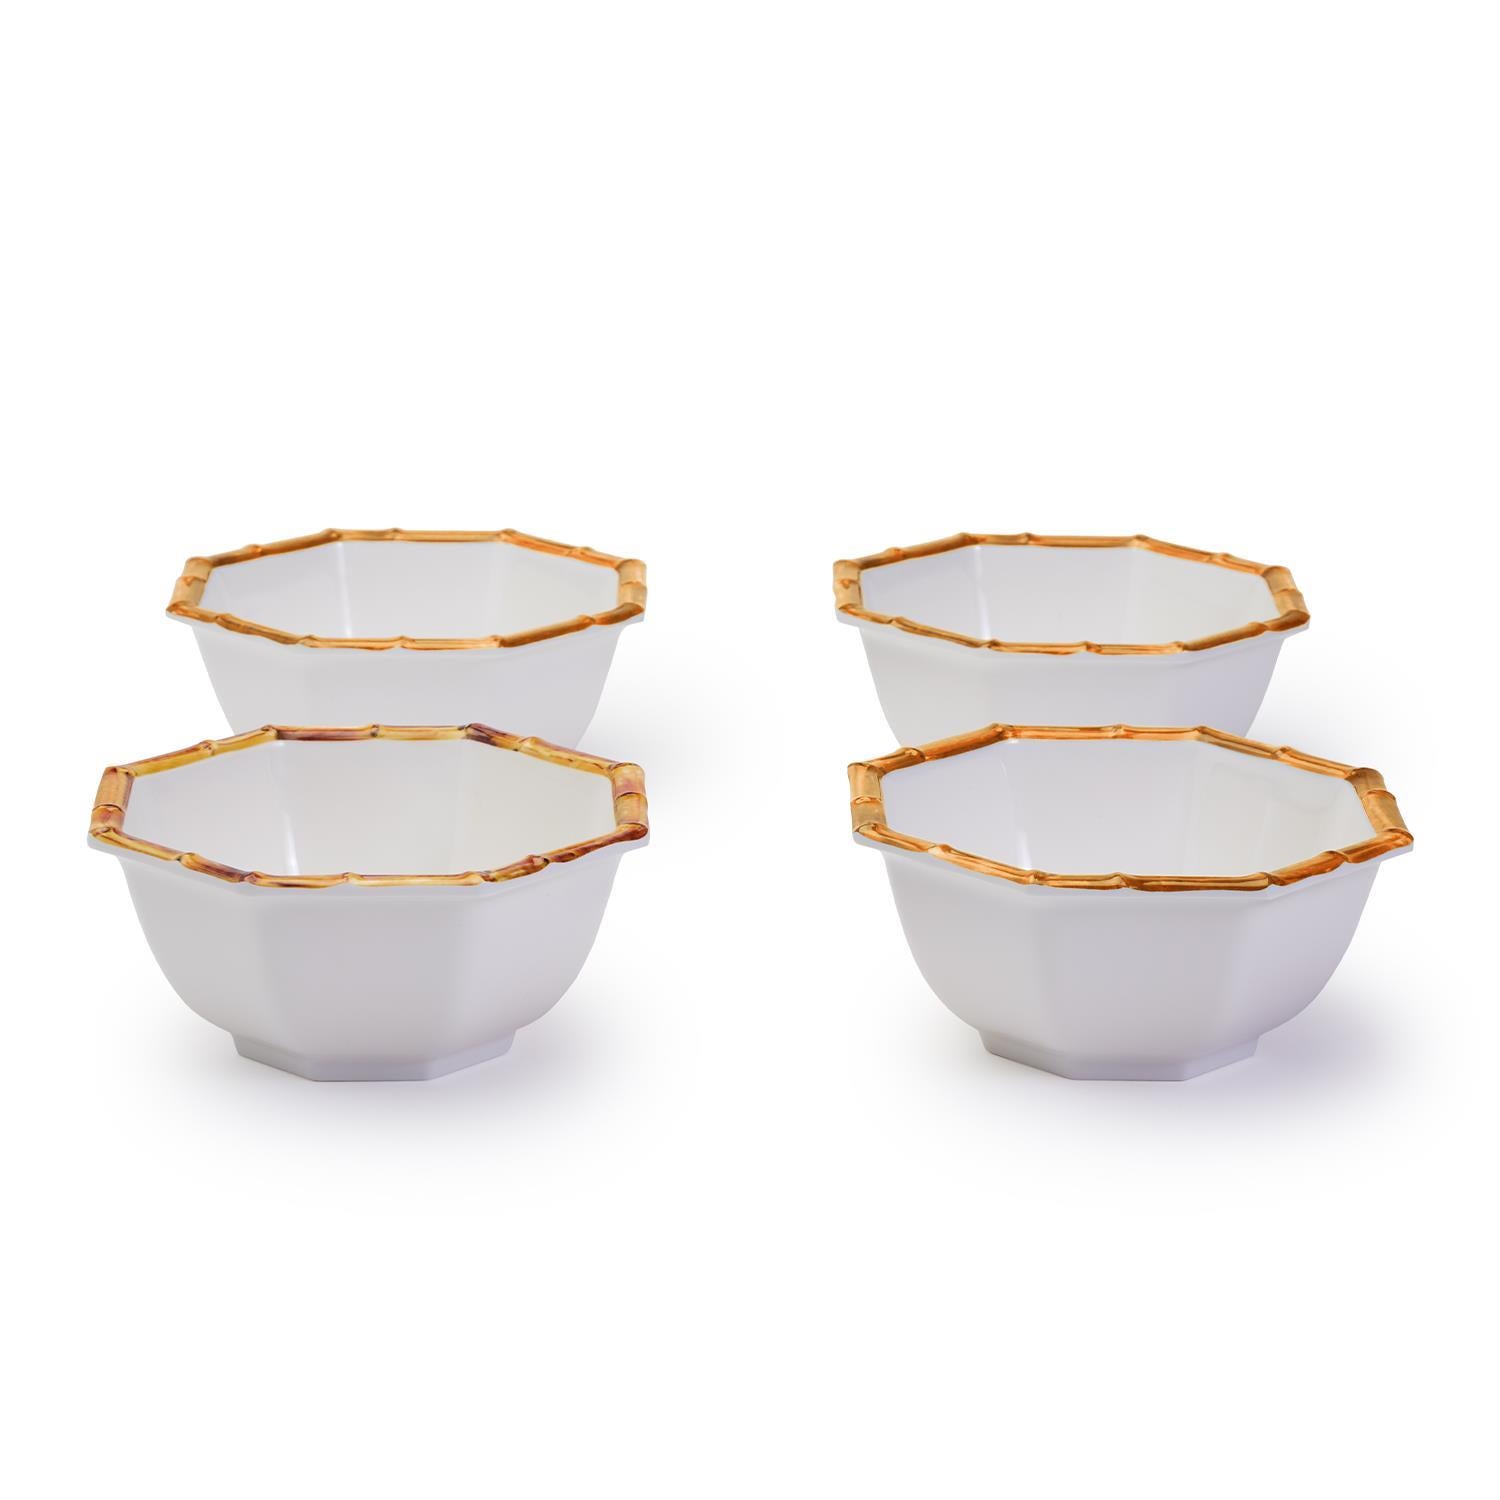 Two's Company S/4 Bamboo Touch Octagonal Bowls